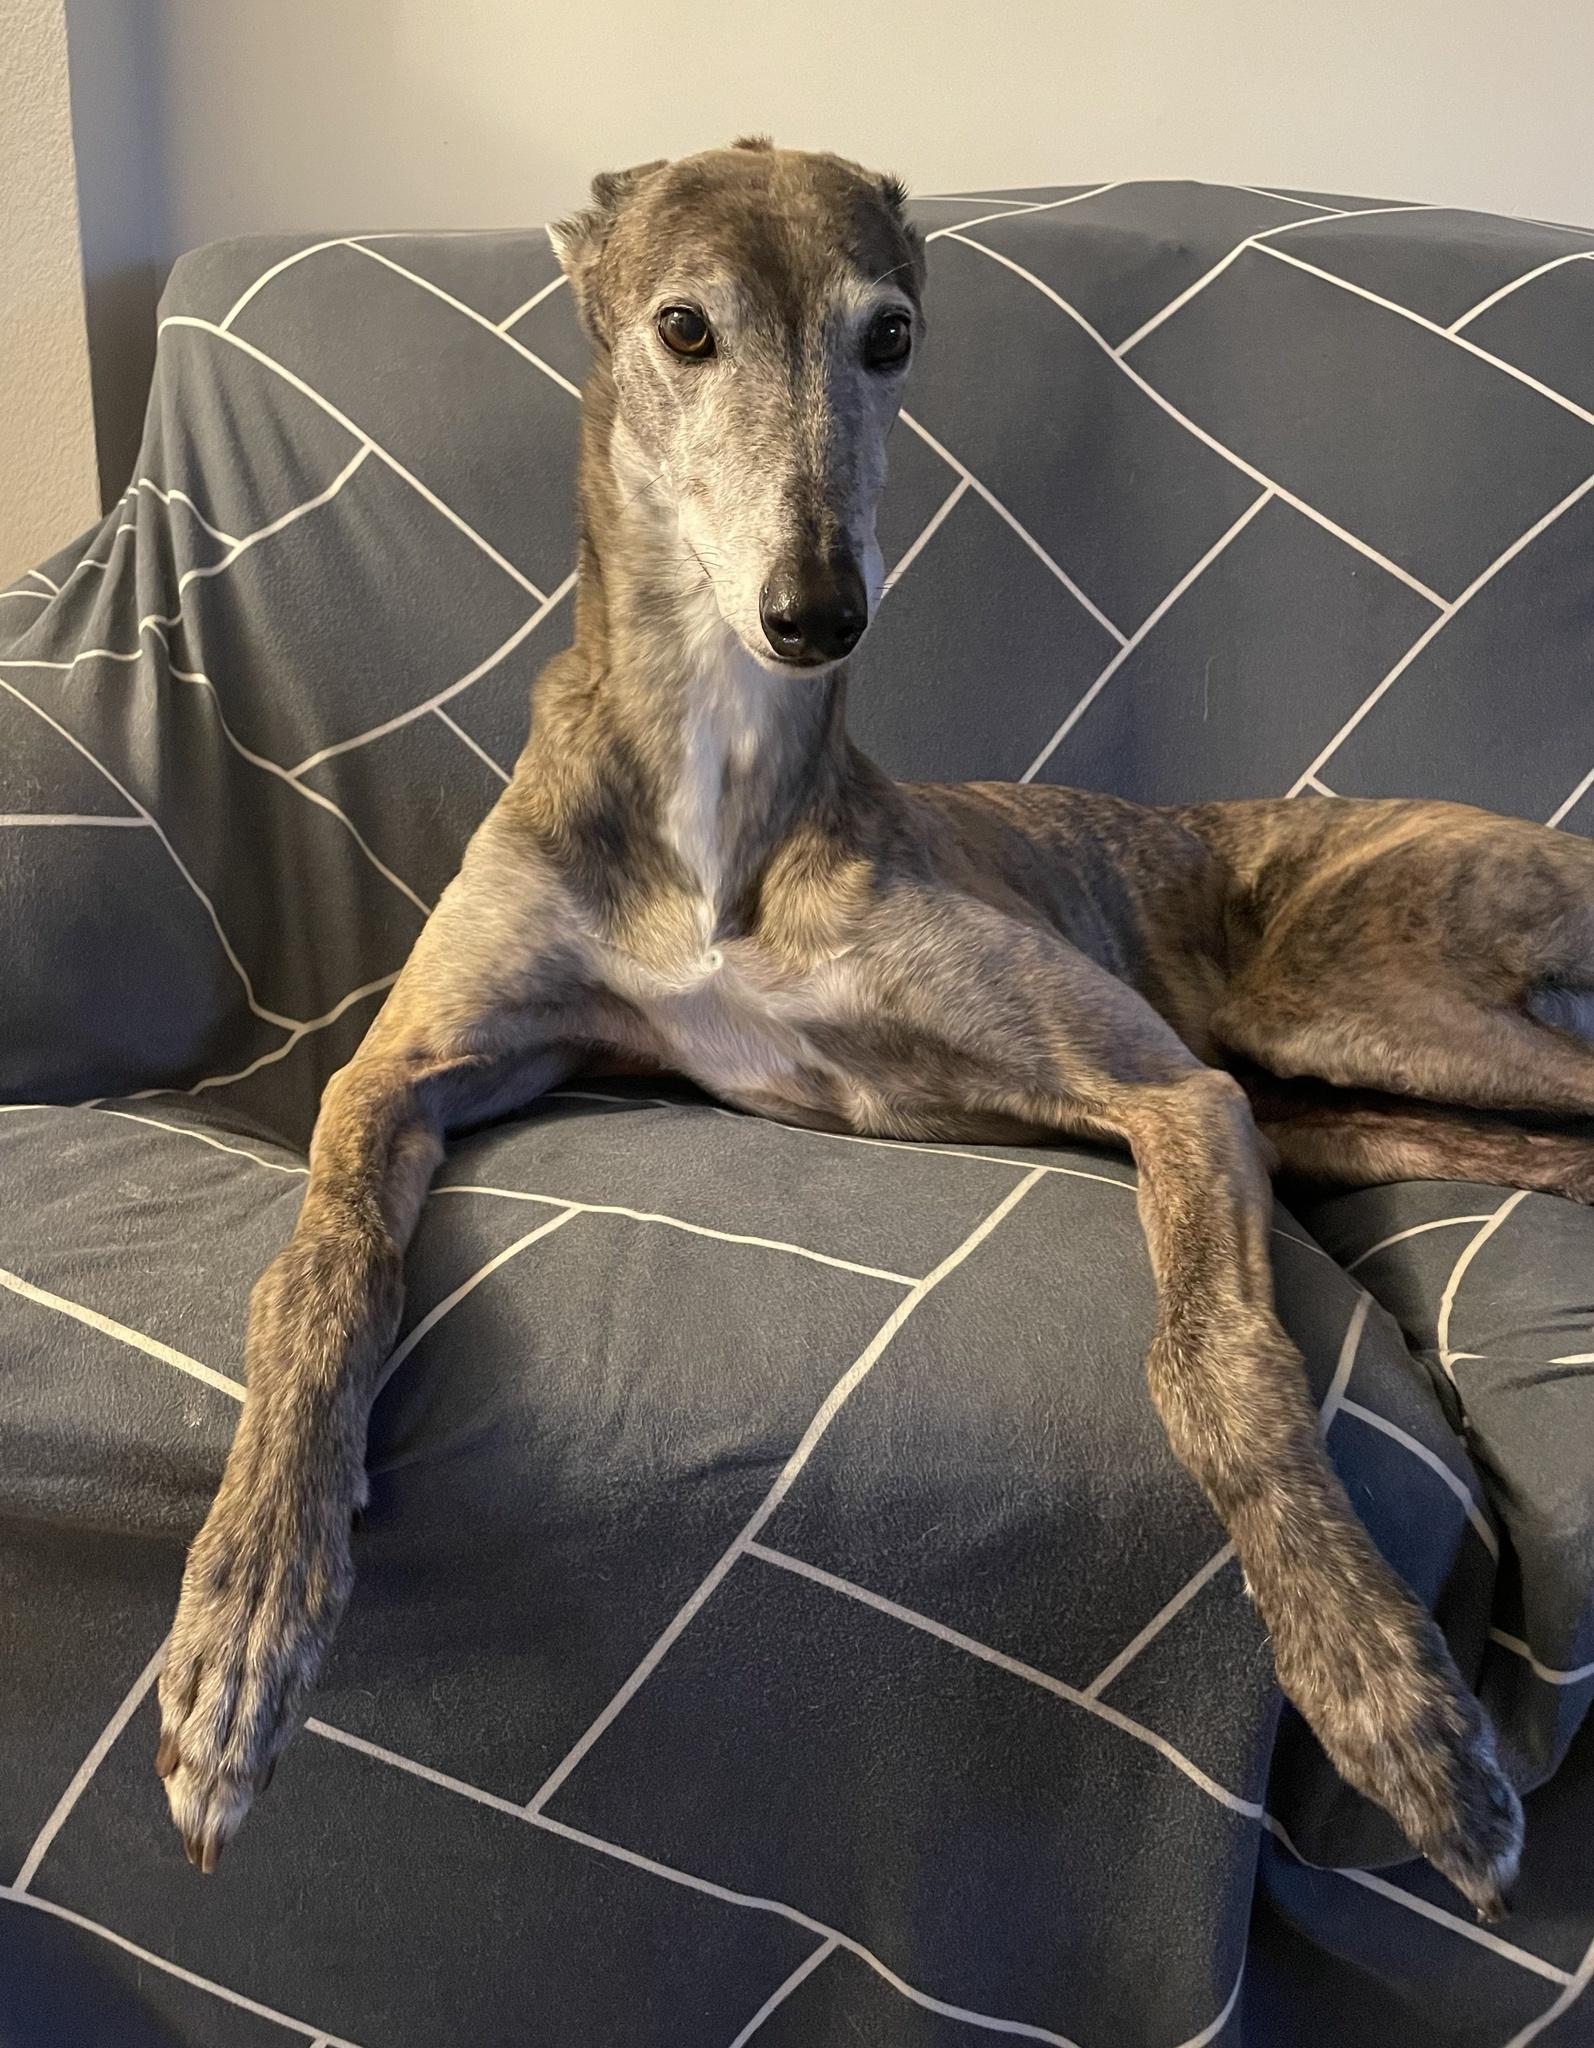 Chewy the Greyhound says The ability you doin?